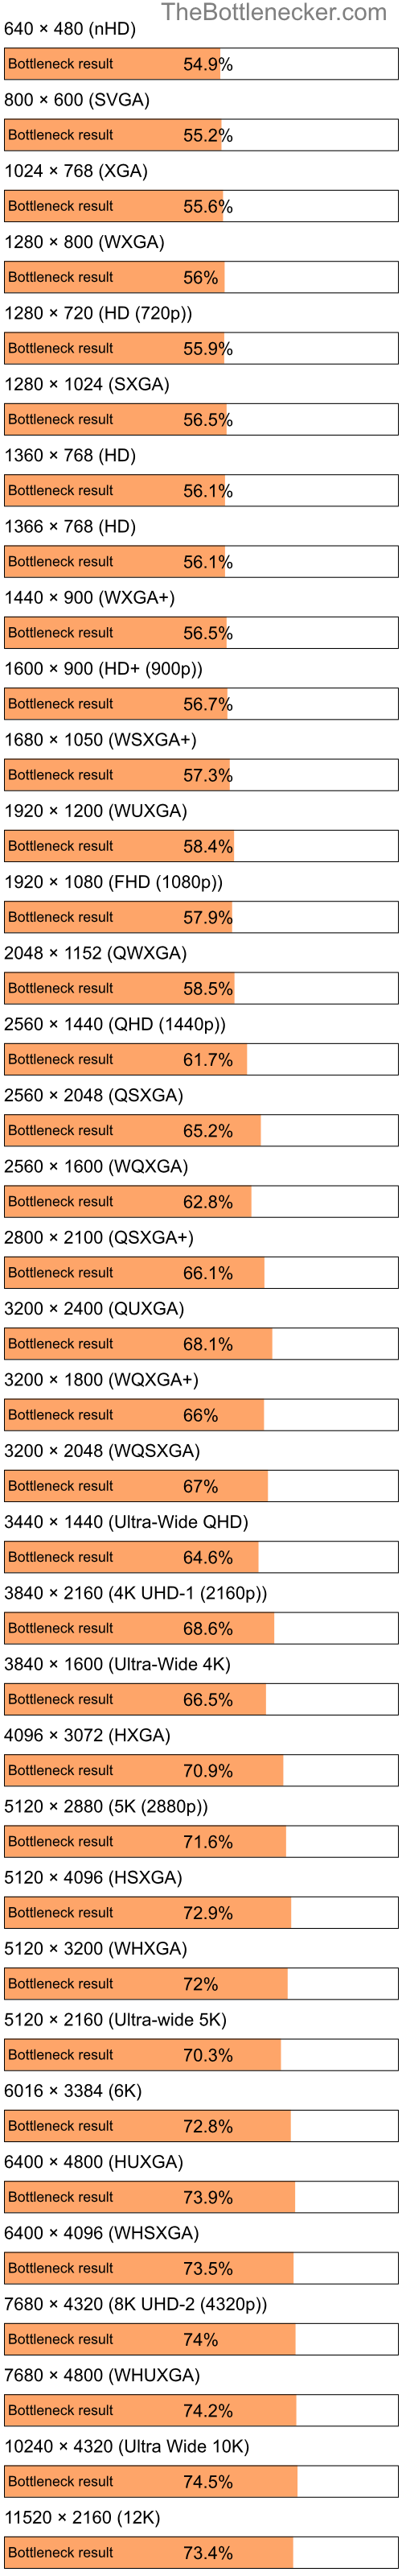 Bottleneck results by resolution for Intel Pentium 4 and NVIDIA GeForce 8600 GS in Processor Intense Tasks